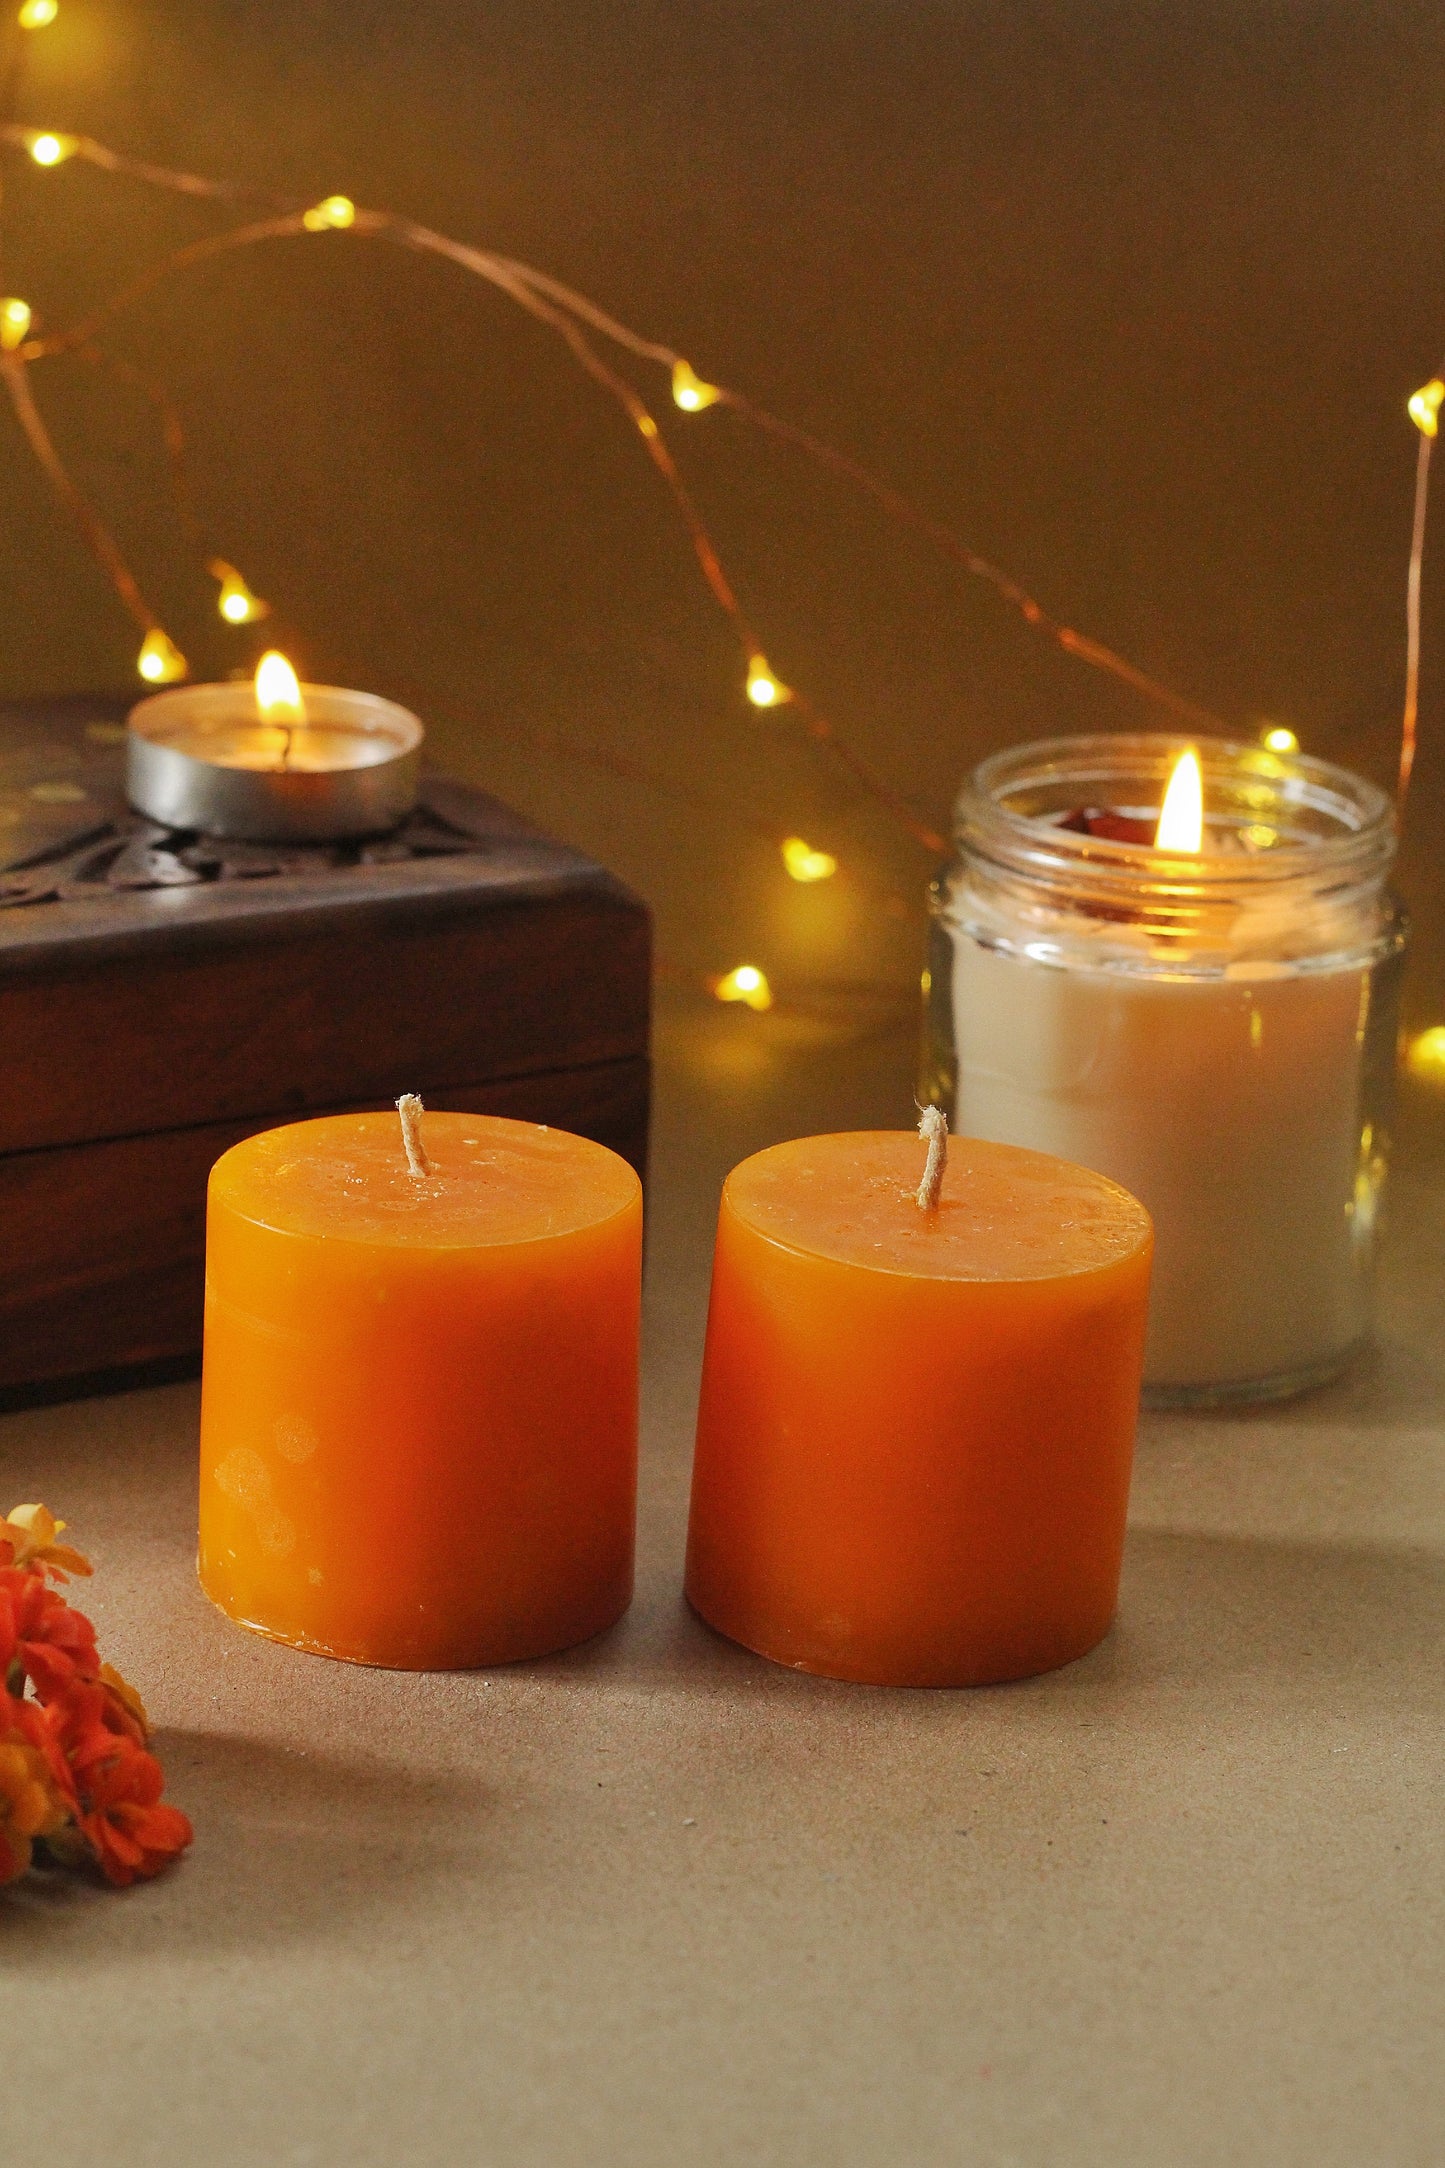 Lilith Small Orange Pillar Candle - 2 Inch Pack of 2